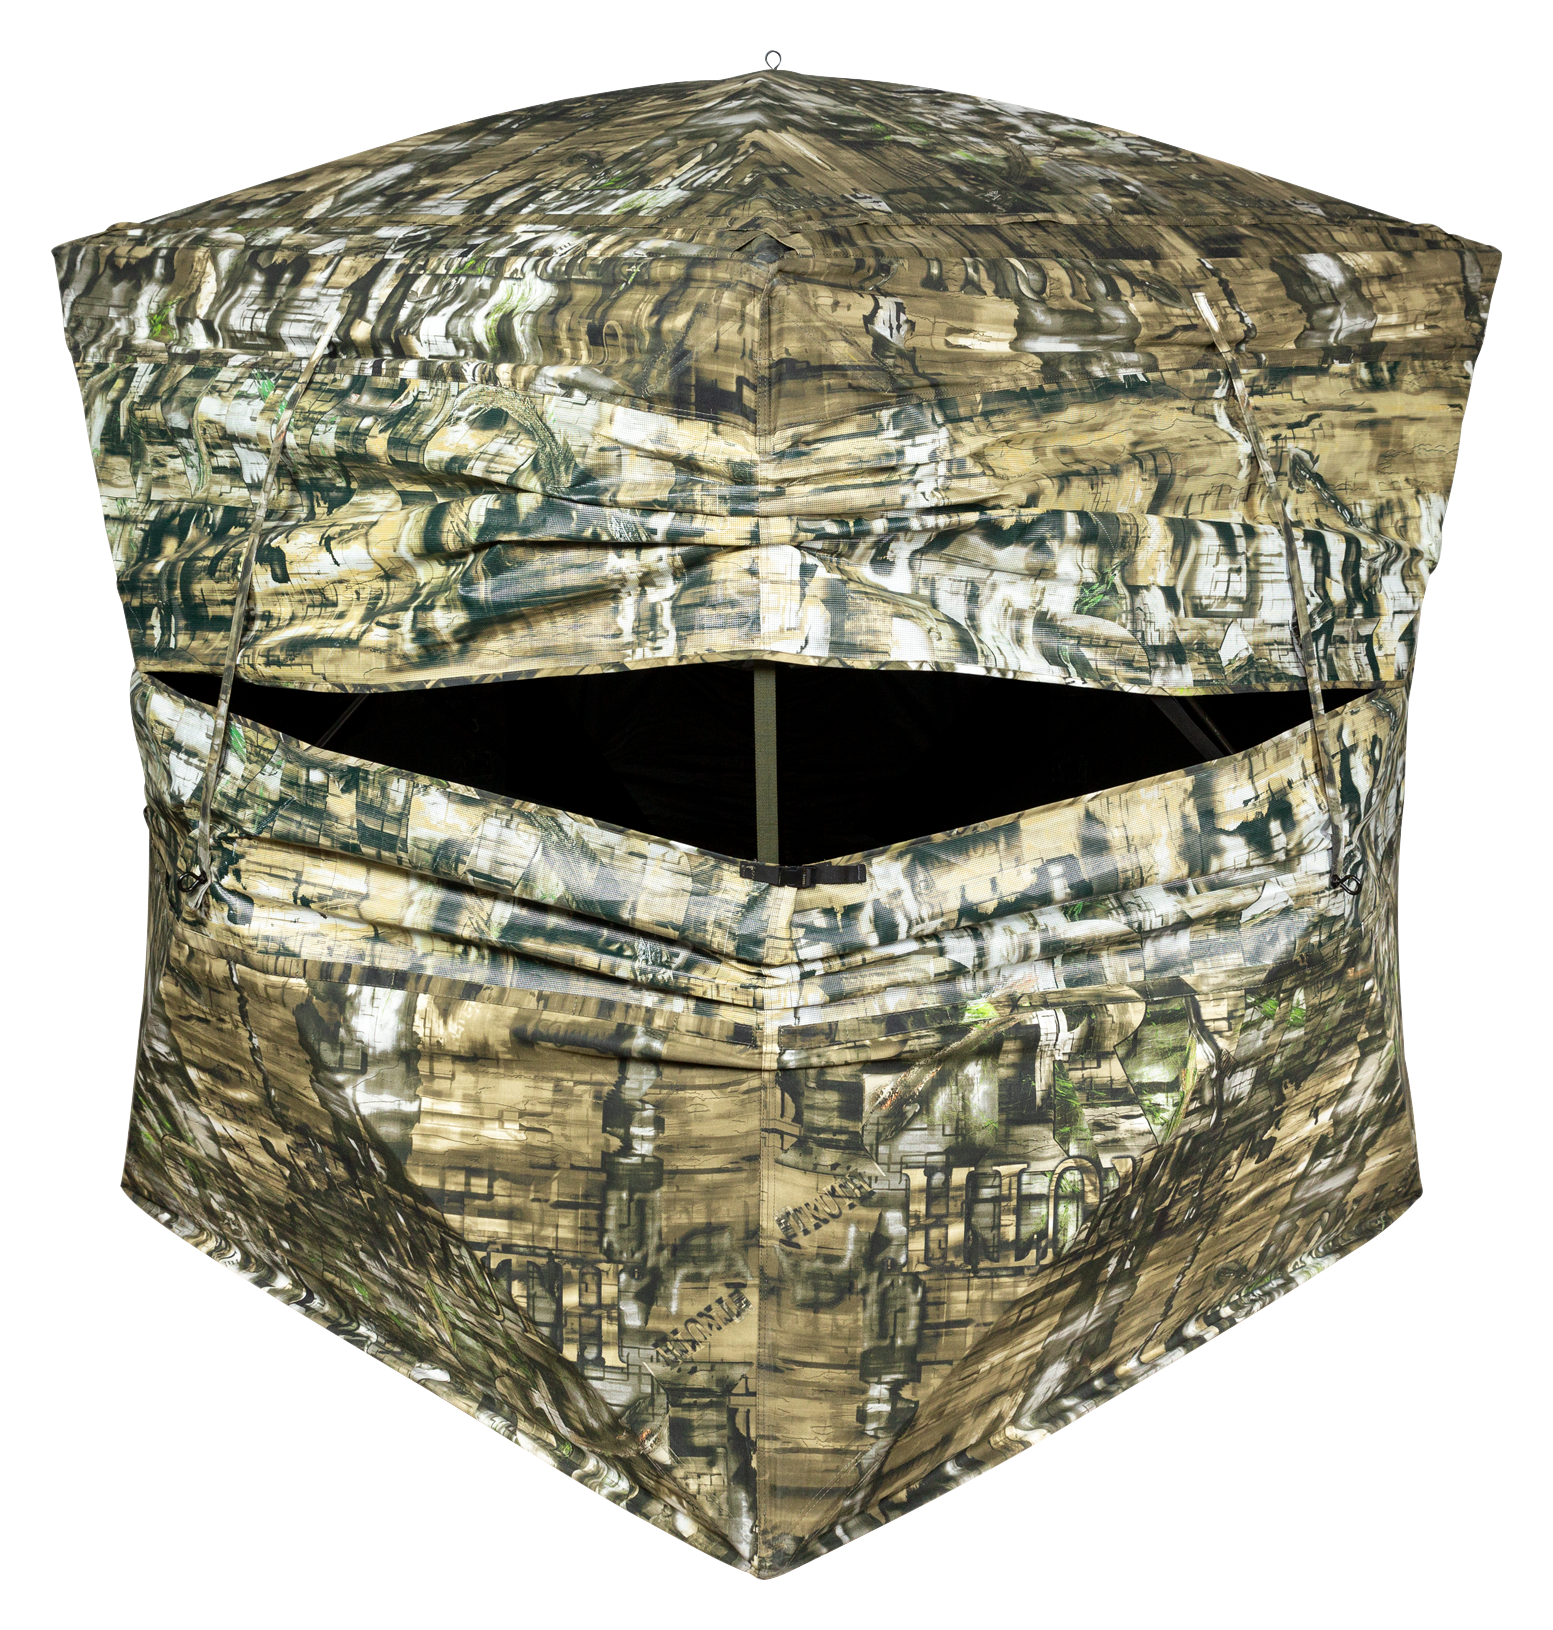 Primos Double Bull SurroundView Double Wide Ground Blind